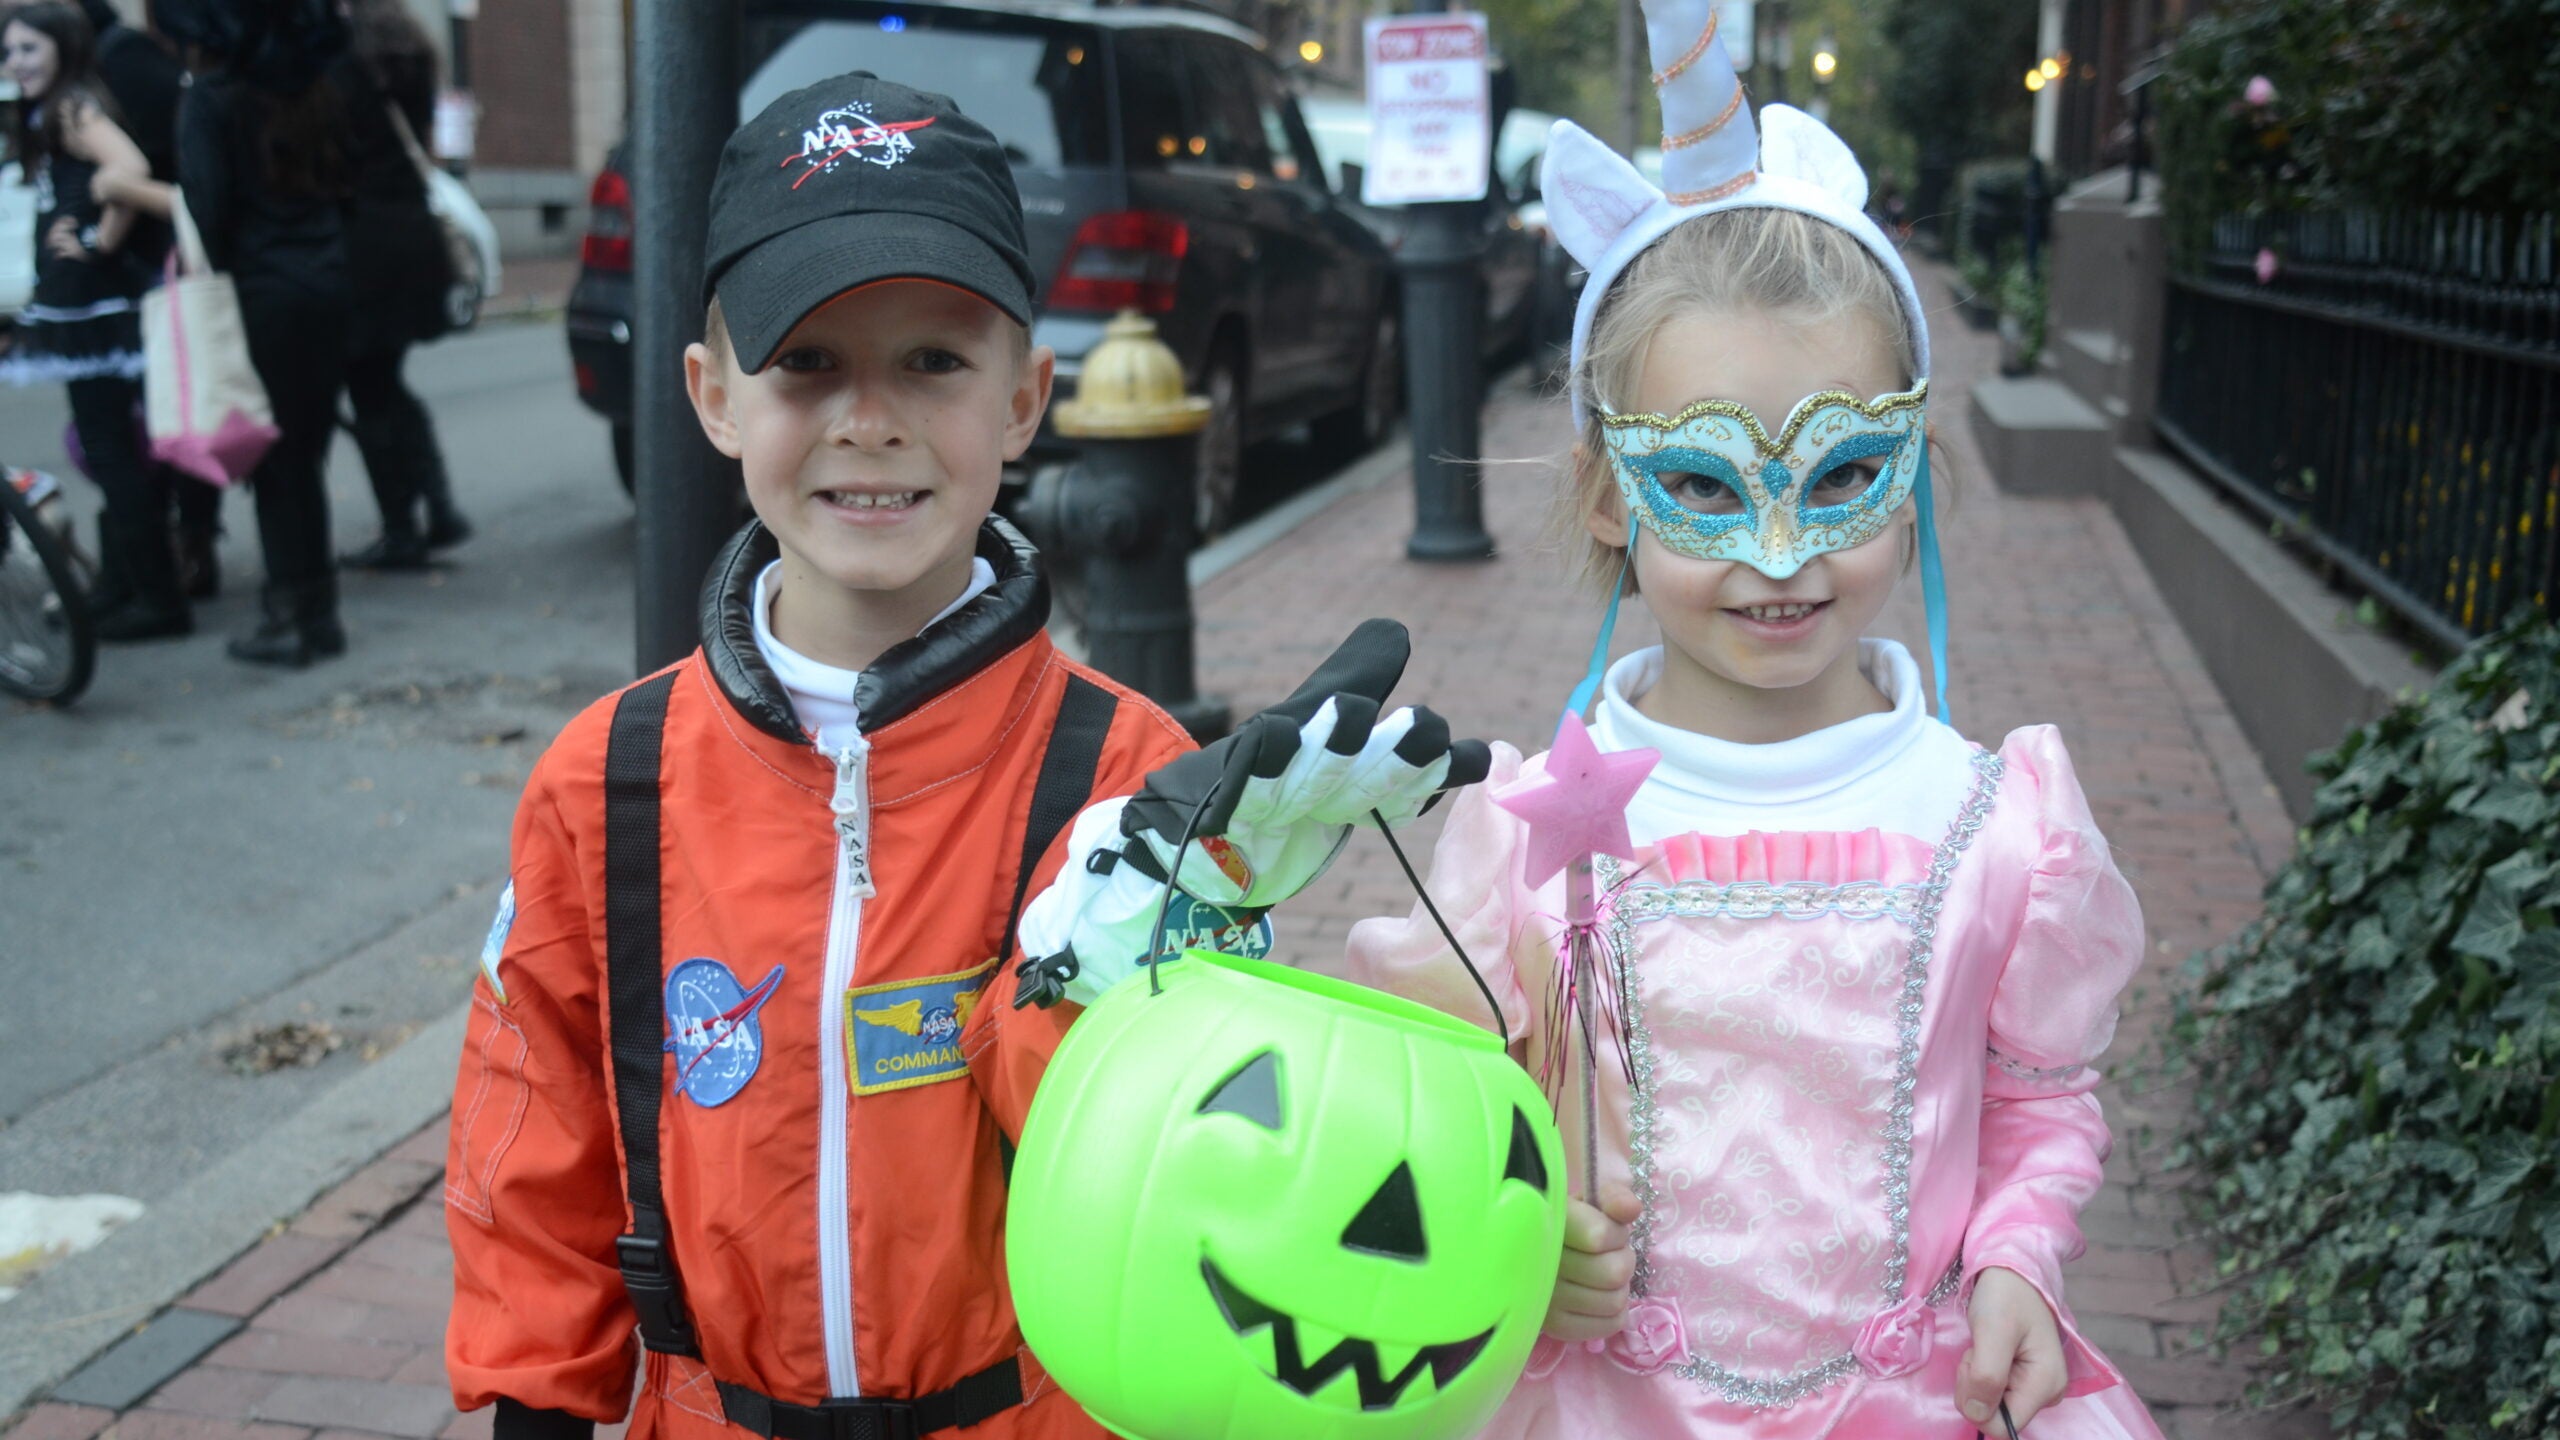 Beacon Hill residents Wakeman Gribbell, 5, (left) and his twin sister, Hadley, trick-or-treated as an astronaut and a unicorn princess, respectively.